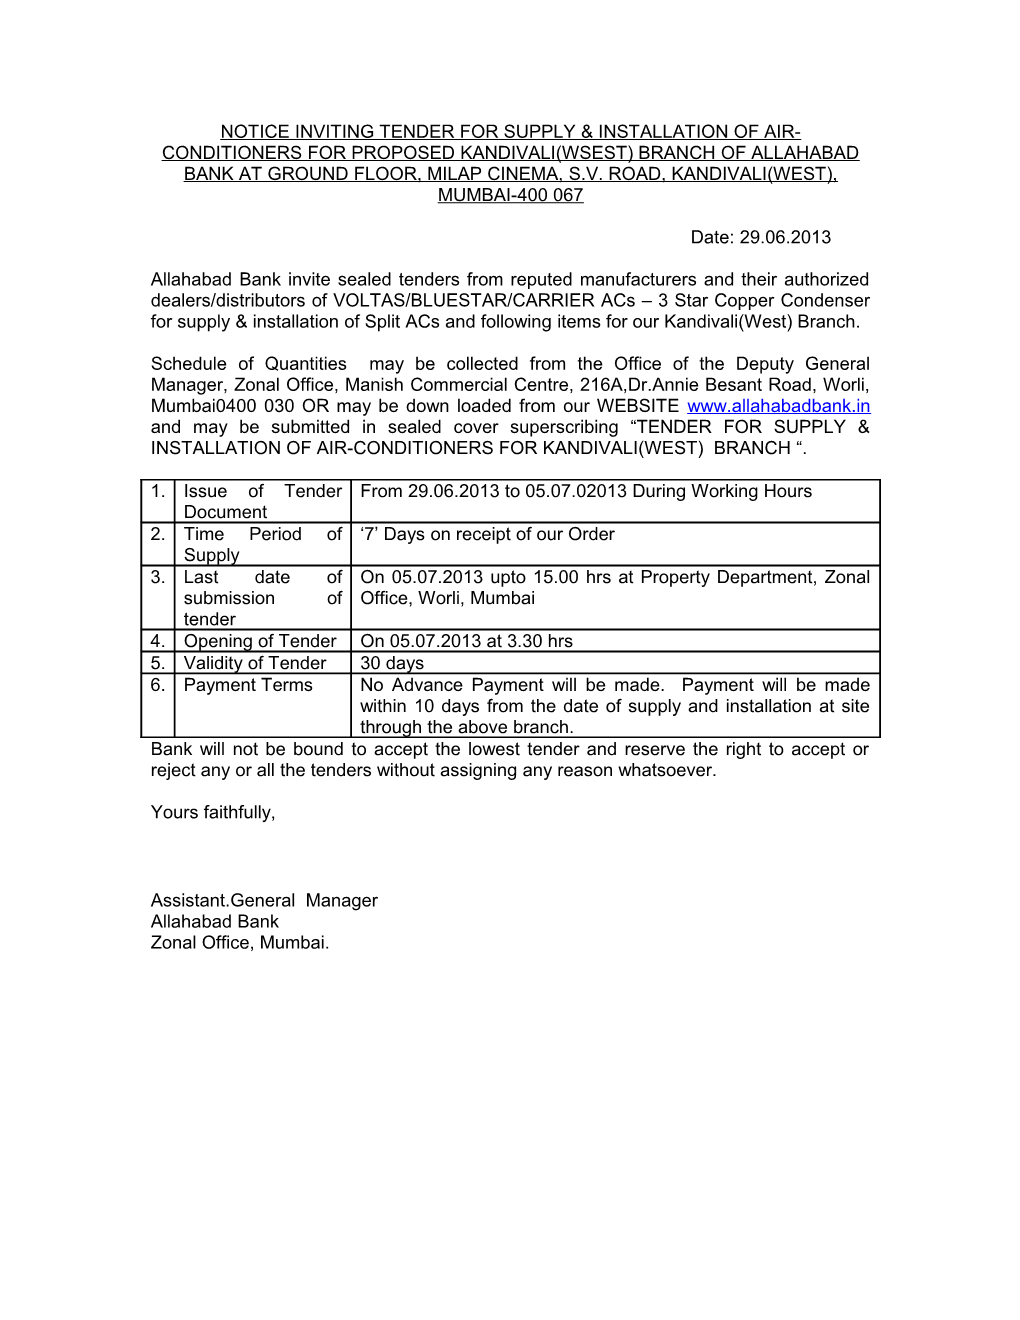 Notice Inviting Tender for Supply & Installation of Air-Conditioners for Proposed